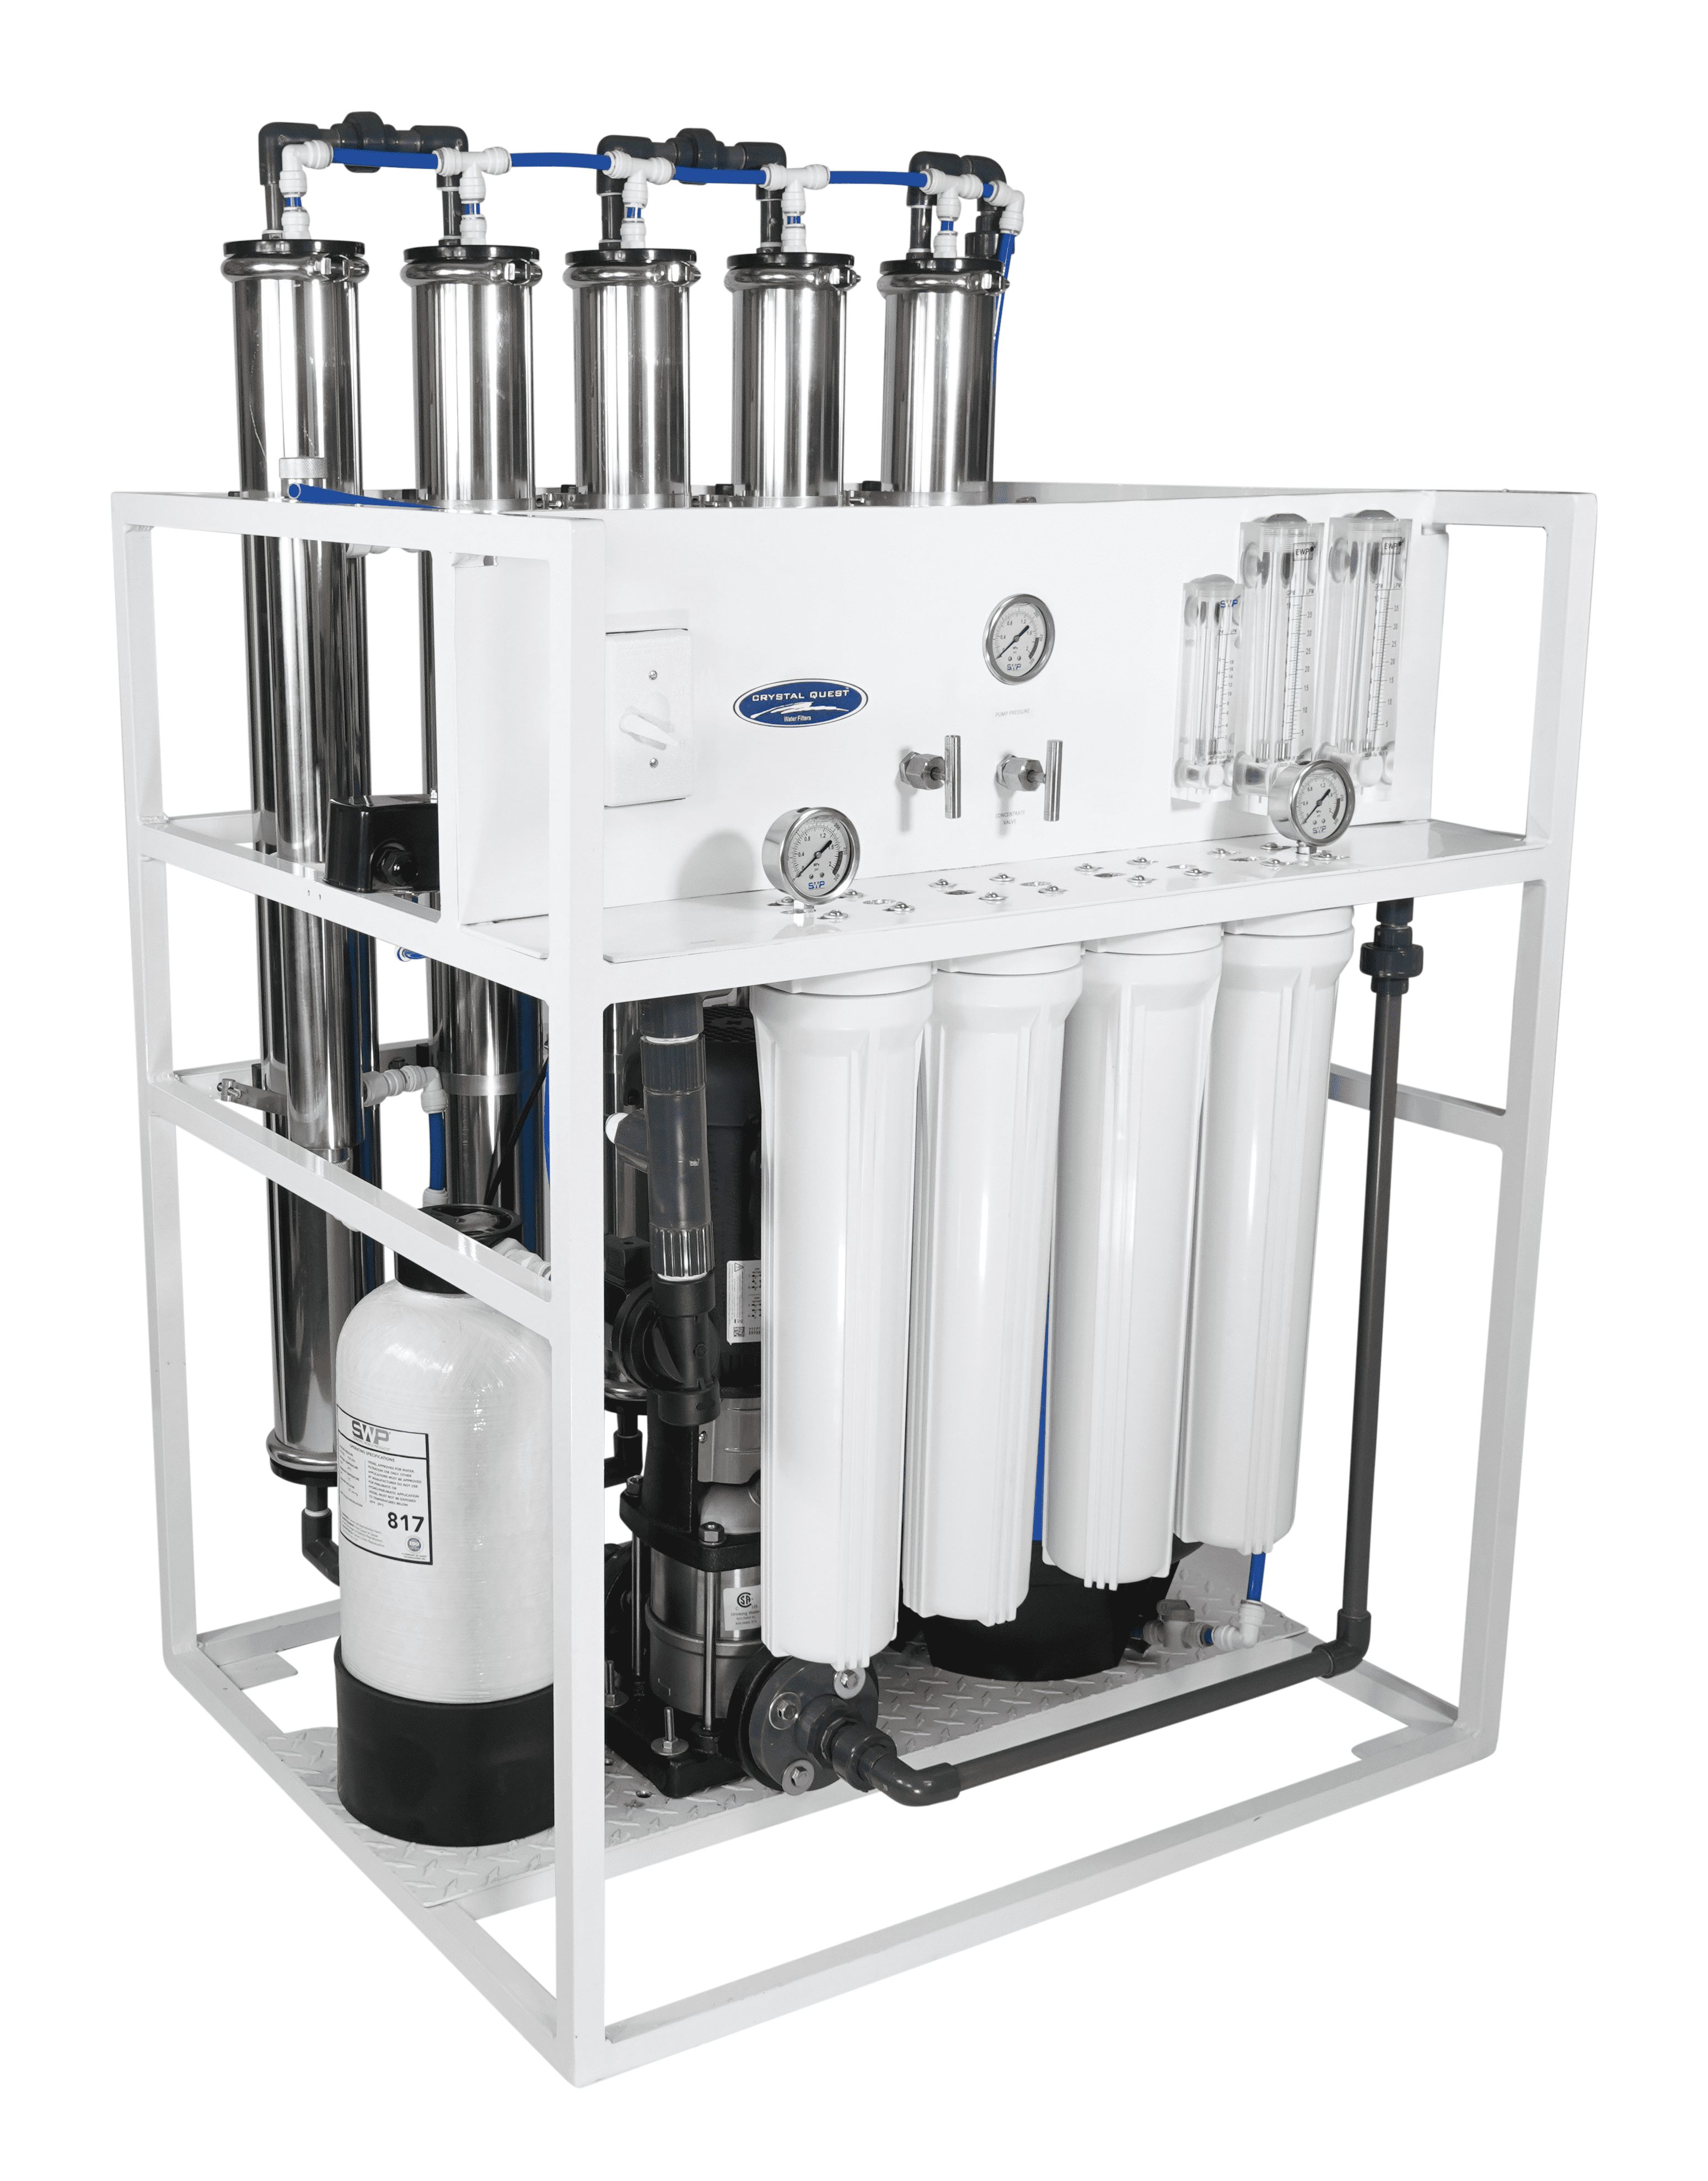 5,000 GPD / Standalone Medical Mid-Flow Reverse Osmosis System (500-7000 GPD) - Commercial - Crystal Quest